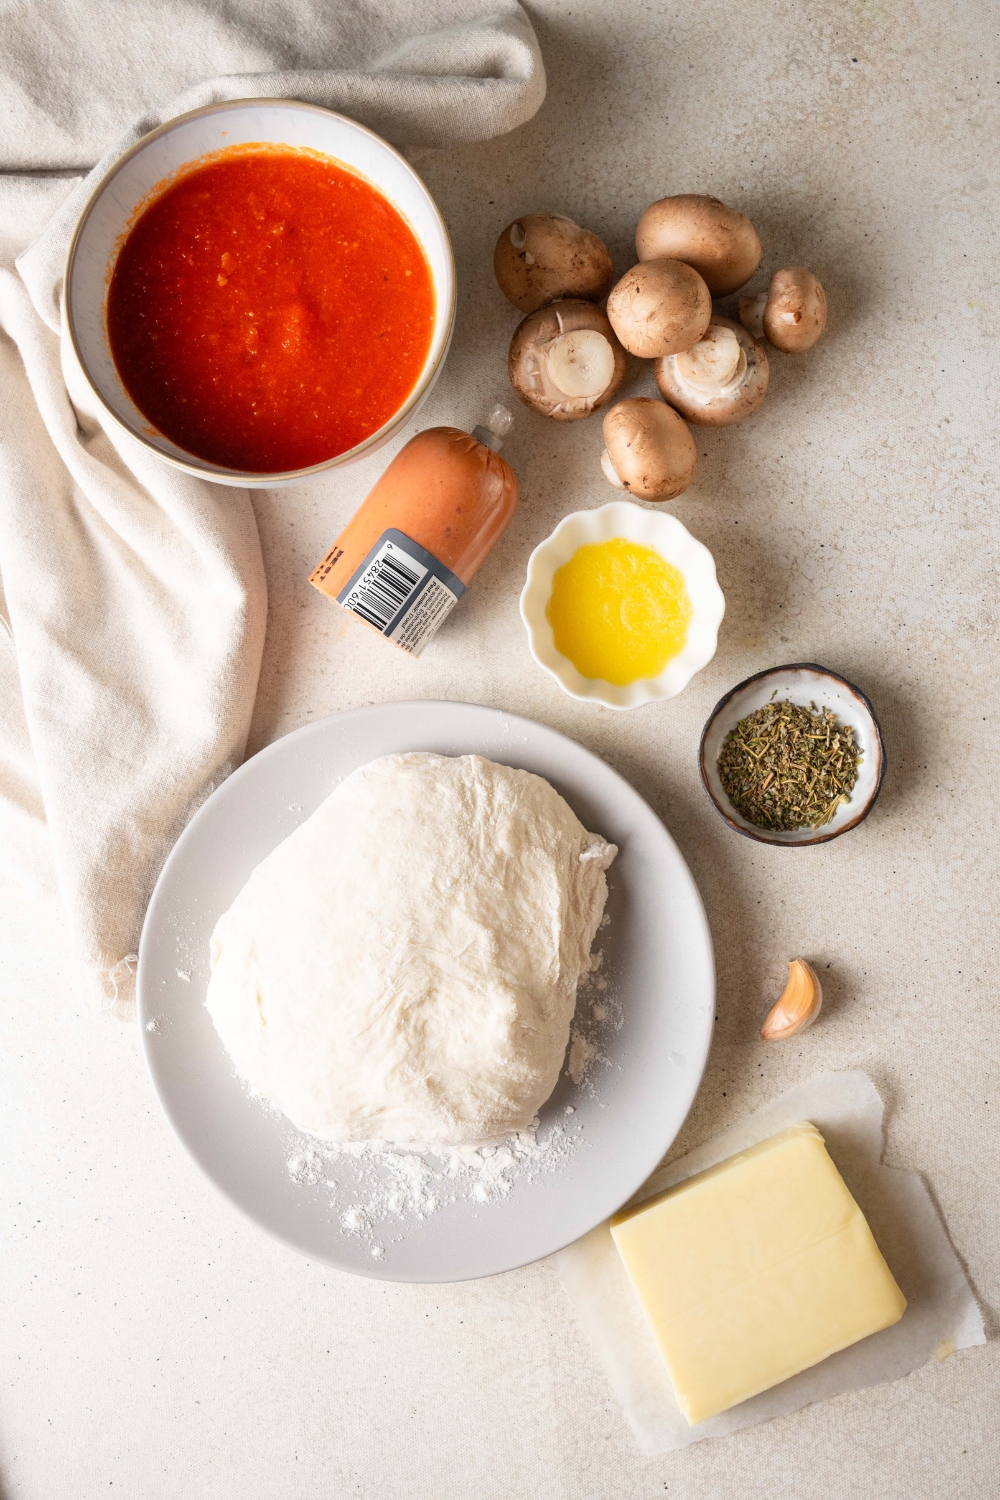 Pizza dough, butter, mozzarella cheese, seasonings, pepperoni, mushrooms, and crushed tomatoes are all in separate containers on a counter top.